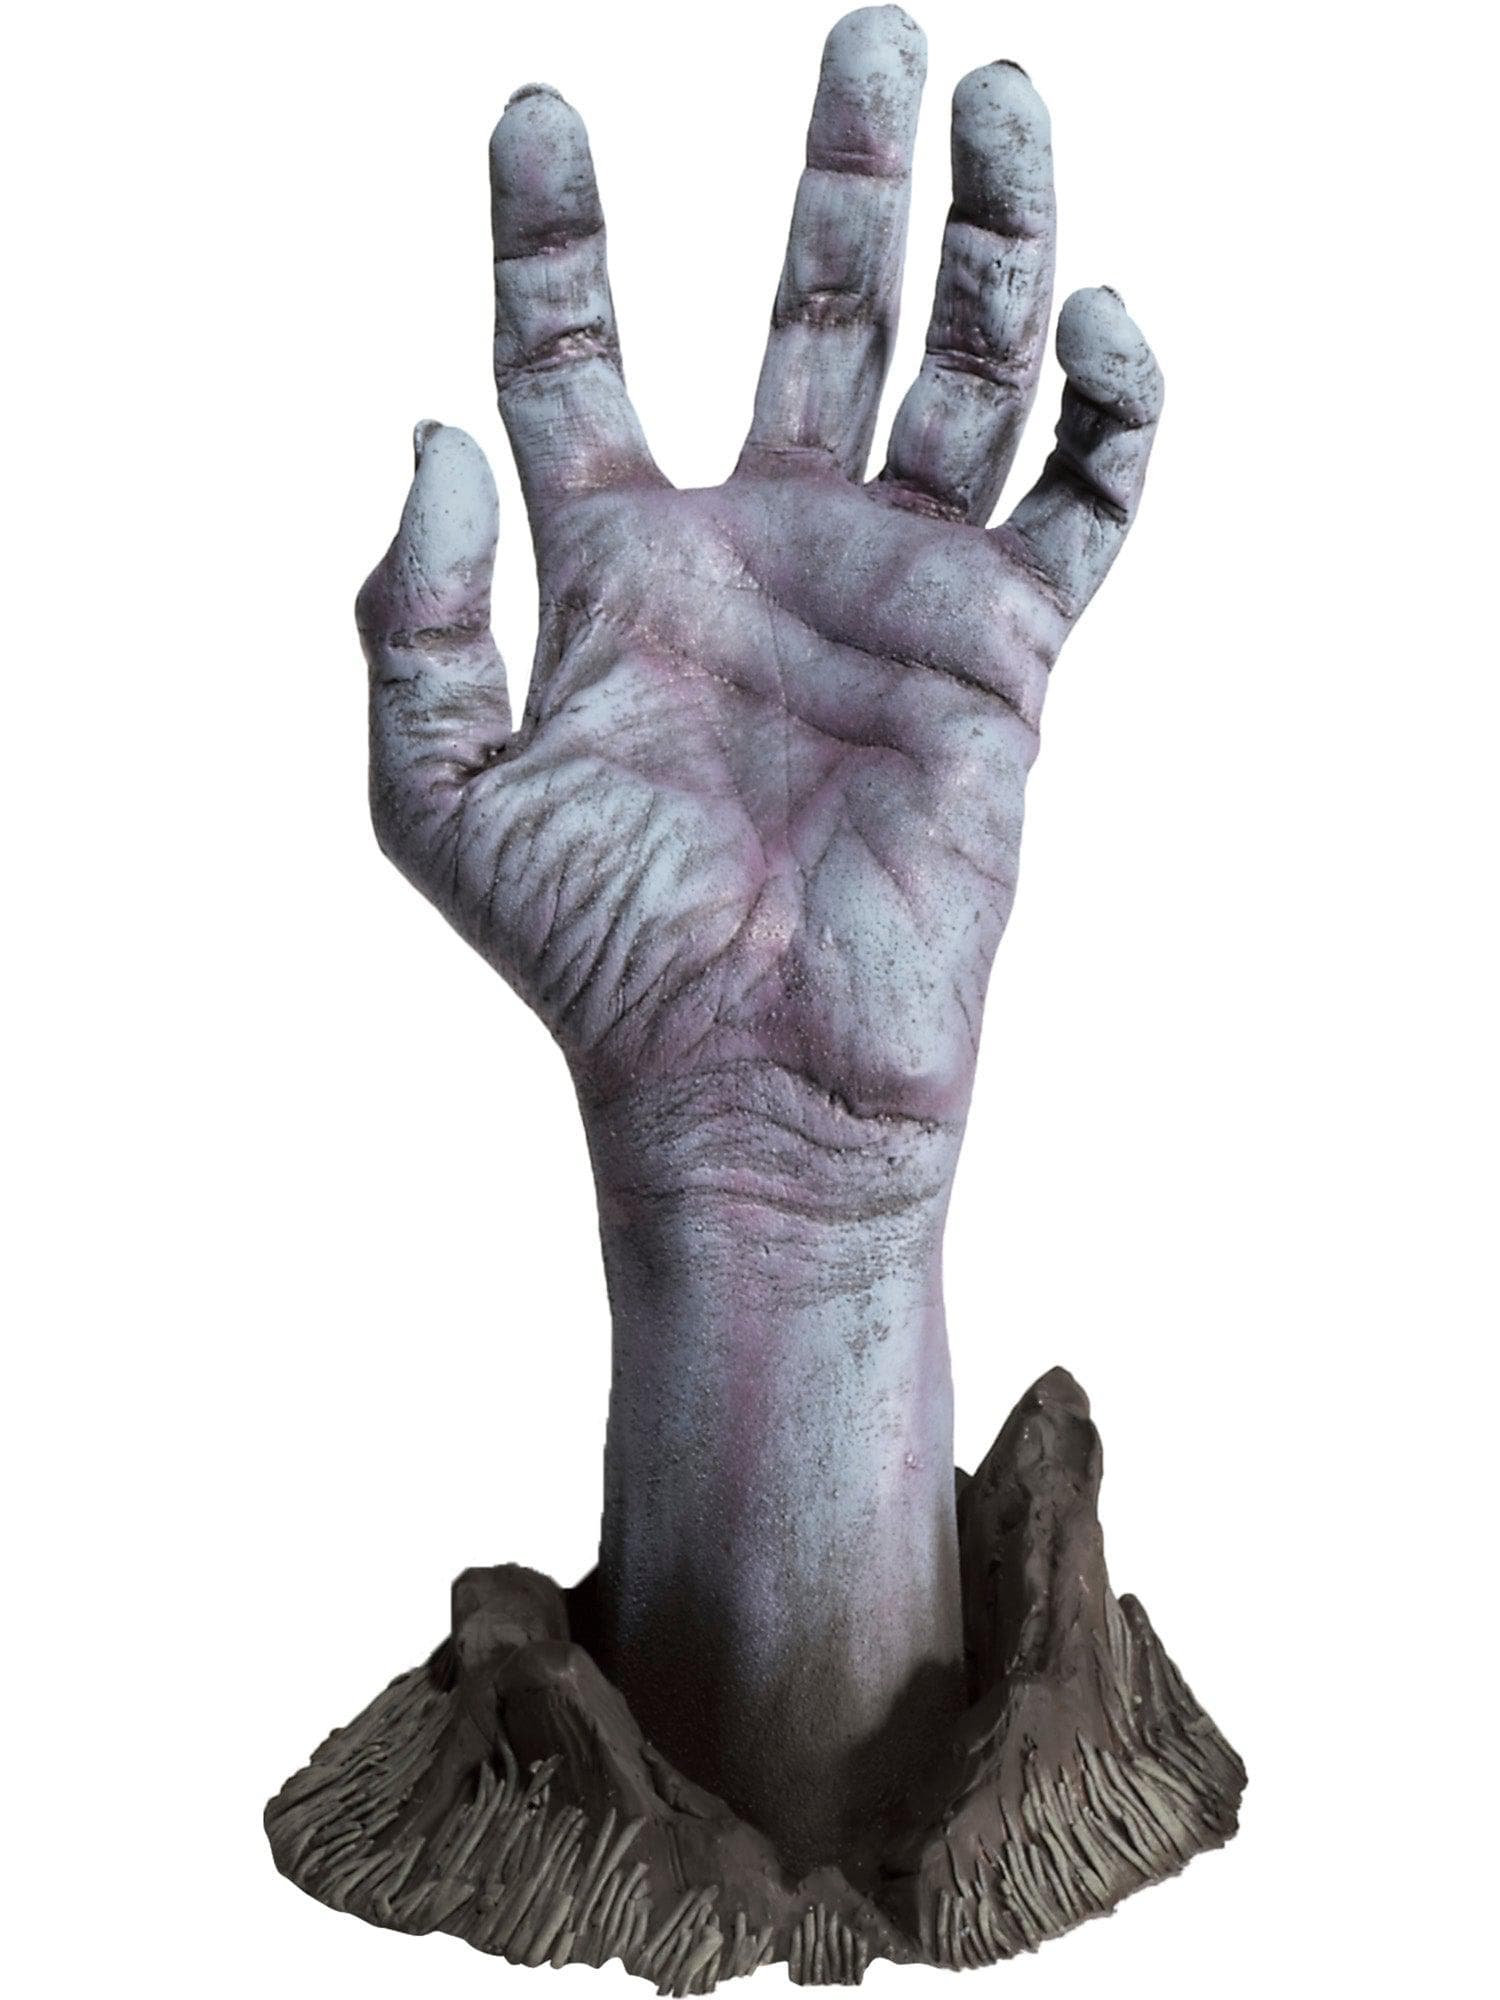 10-inch Indoor or Outdoor Zombie Hand from the Ground - costumes.com